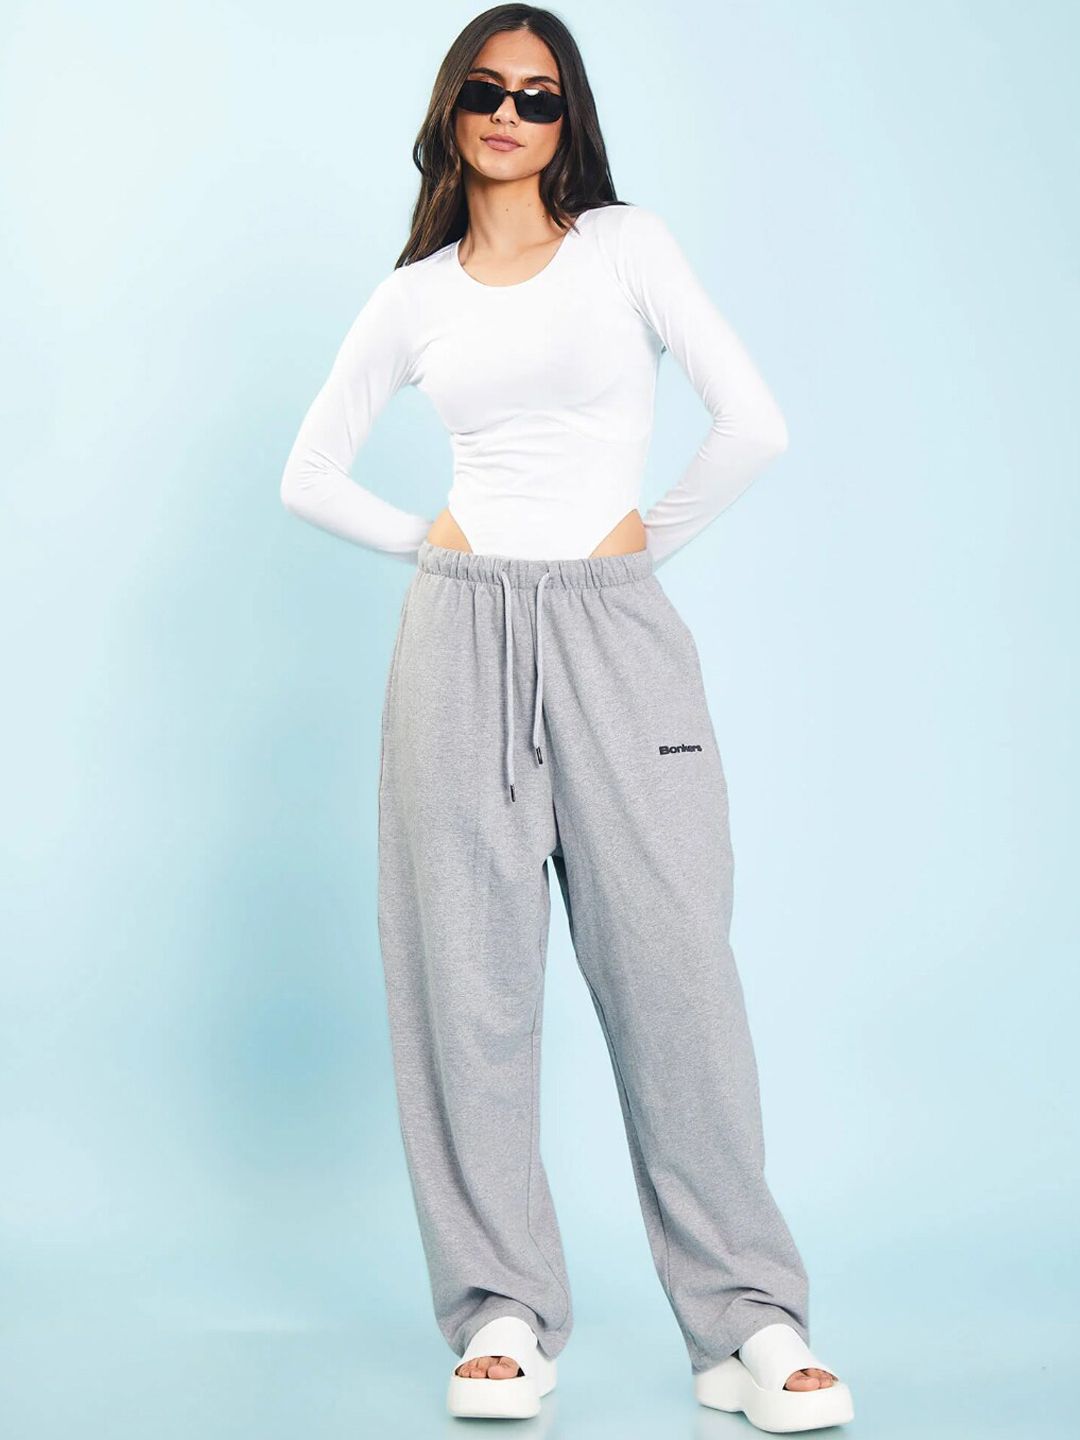 Buy Bonkers Corner Bonkers Corner Women Grey Cotton Relaxed Fit Track Pants  at Redfynd